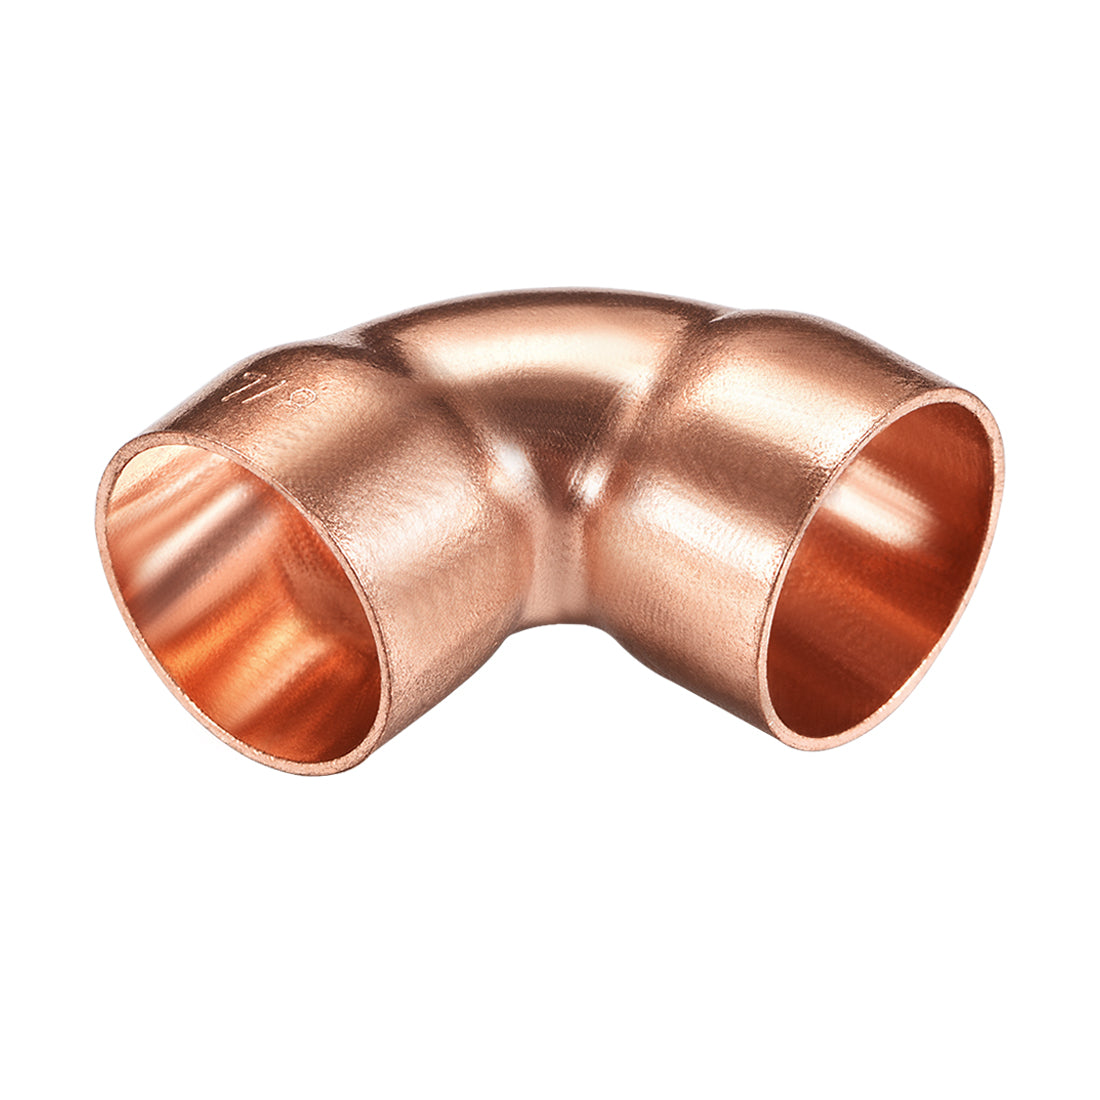 uxcell Uxcell 22.2mm ID 90 Degree Copper Elbow Pipe Fitting Connector 2pcs